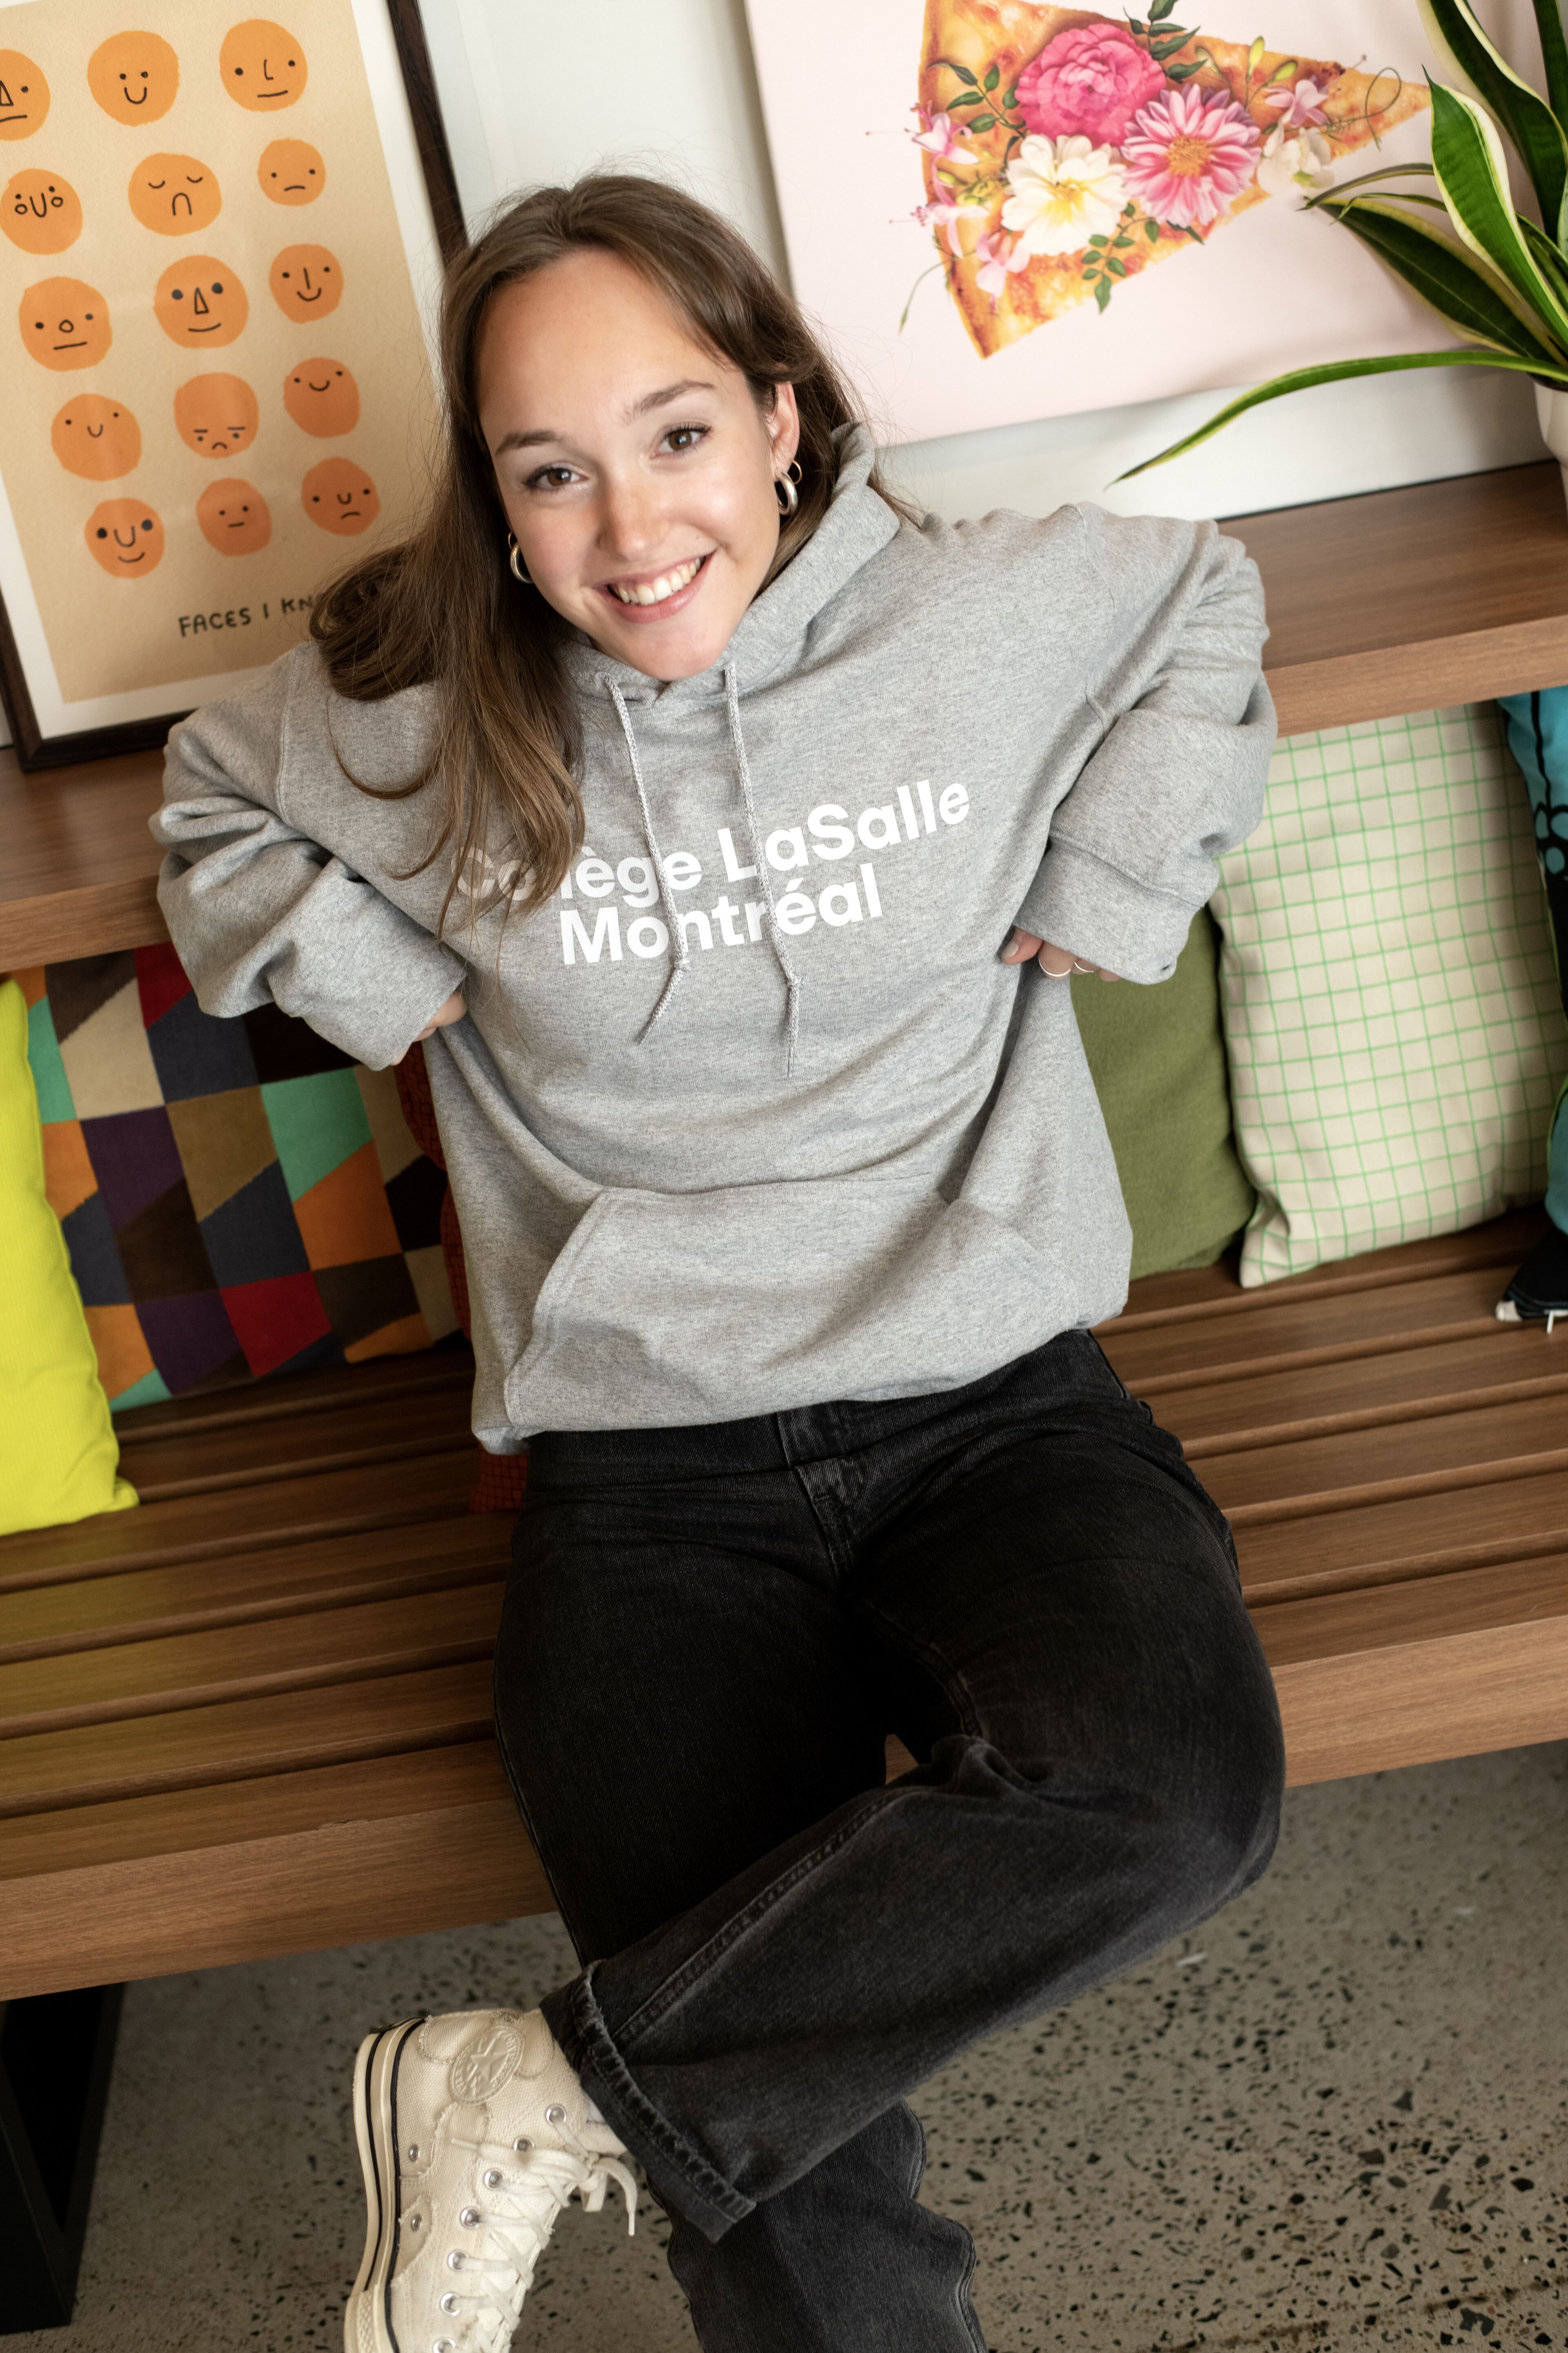 A happy student lounges in a cozy campus corner, showcasing college pride.